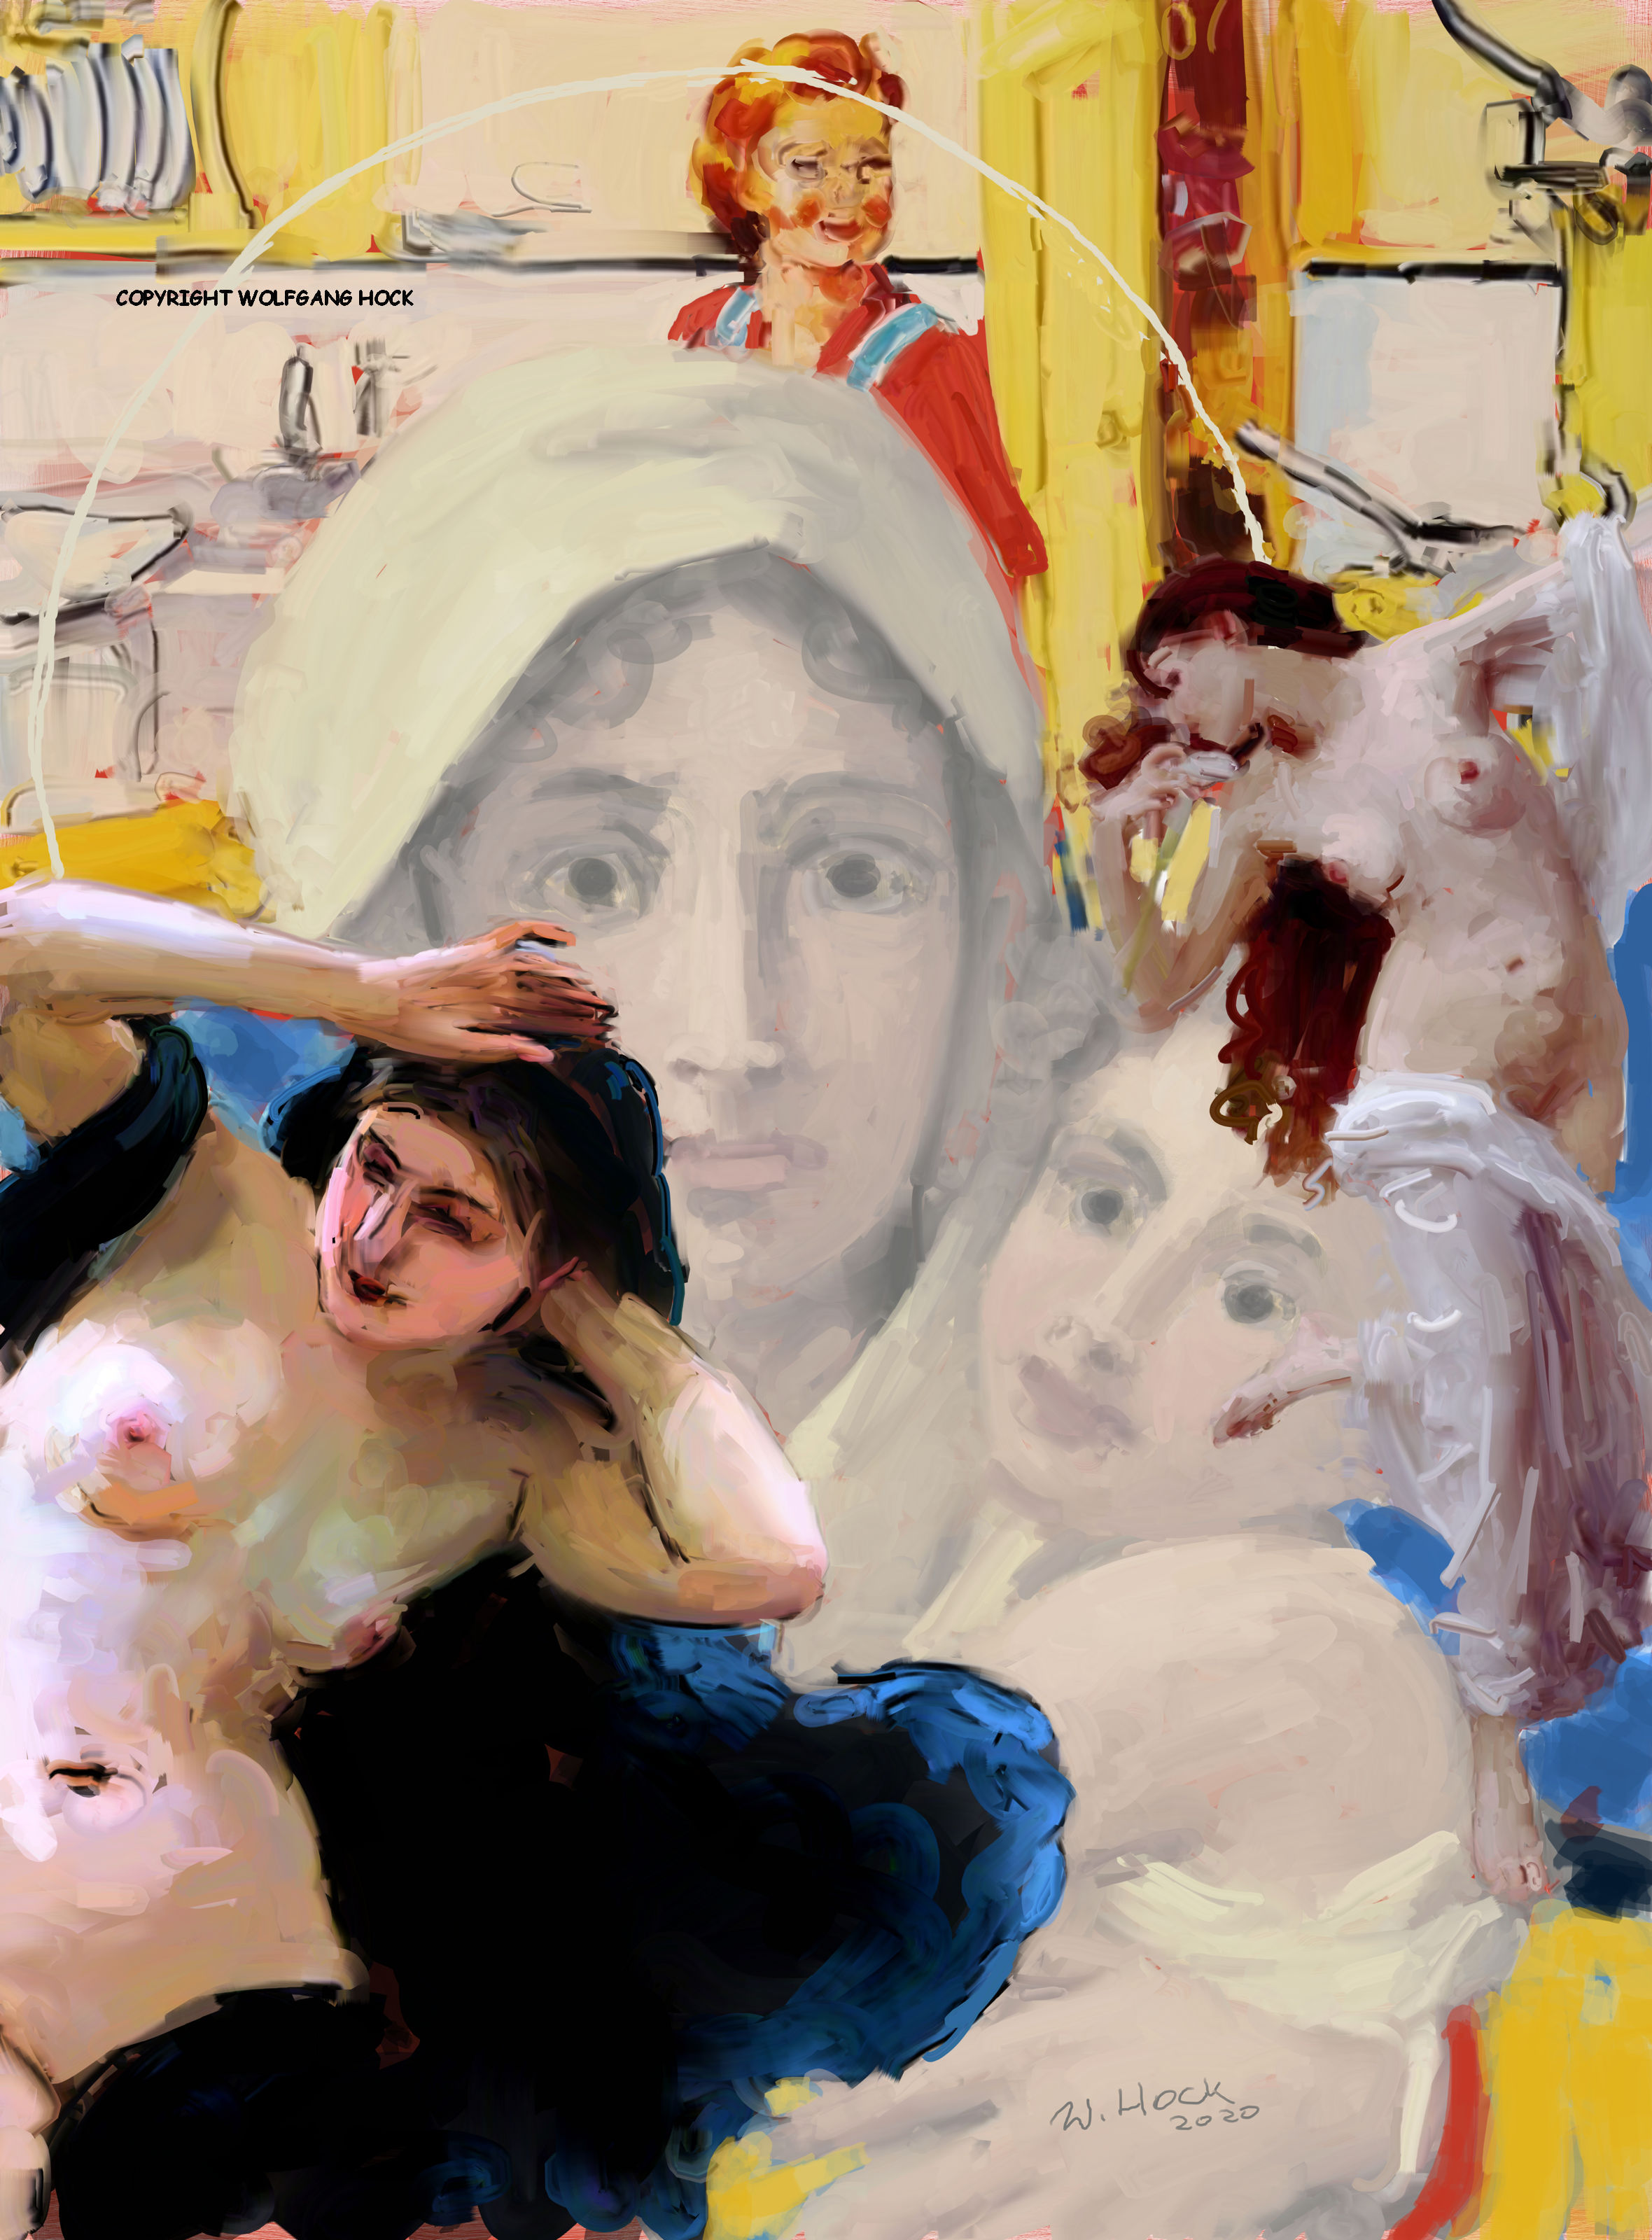 Madonna mit Hausfrau und Engeln - Madonna with housewife and angels - Madona com dona de casa e anjos 2020   Handmade digital painting and collage on canvas 110 x 150 cm (198 megapixels)